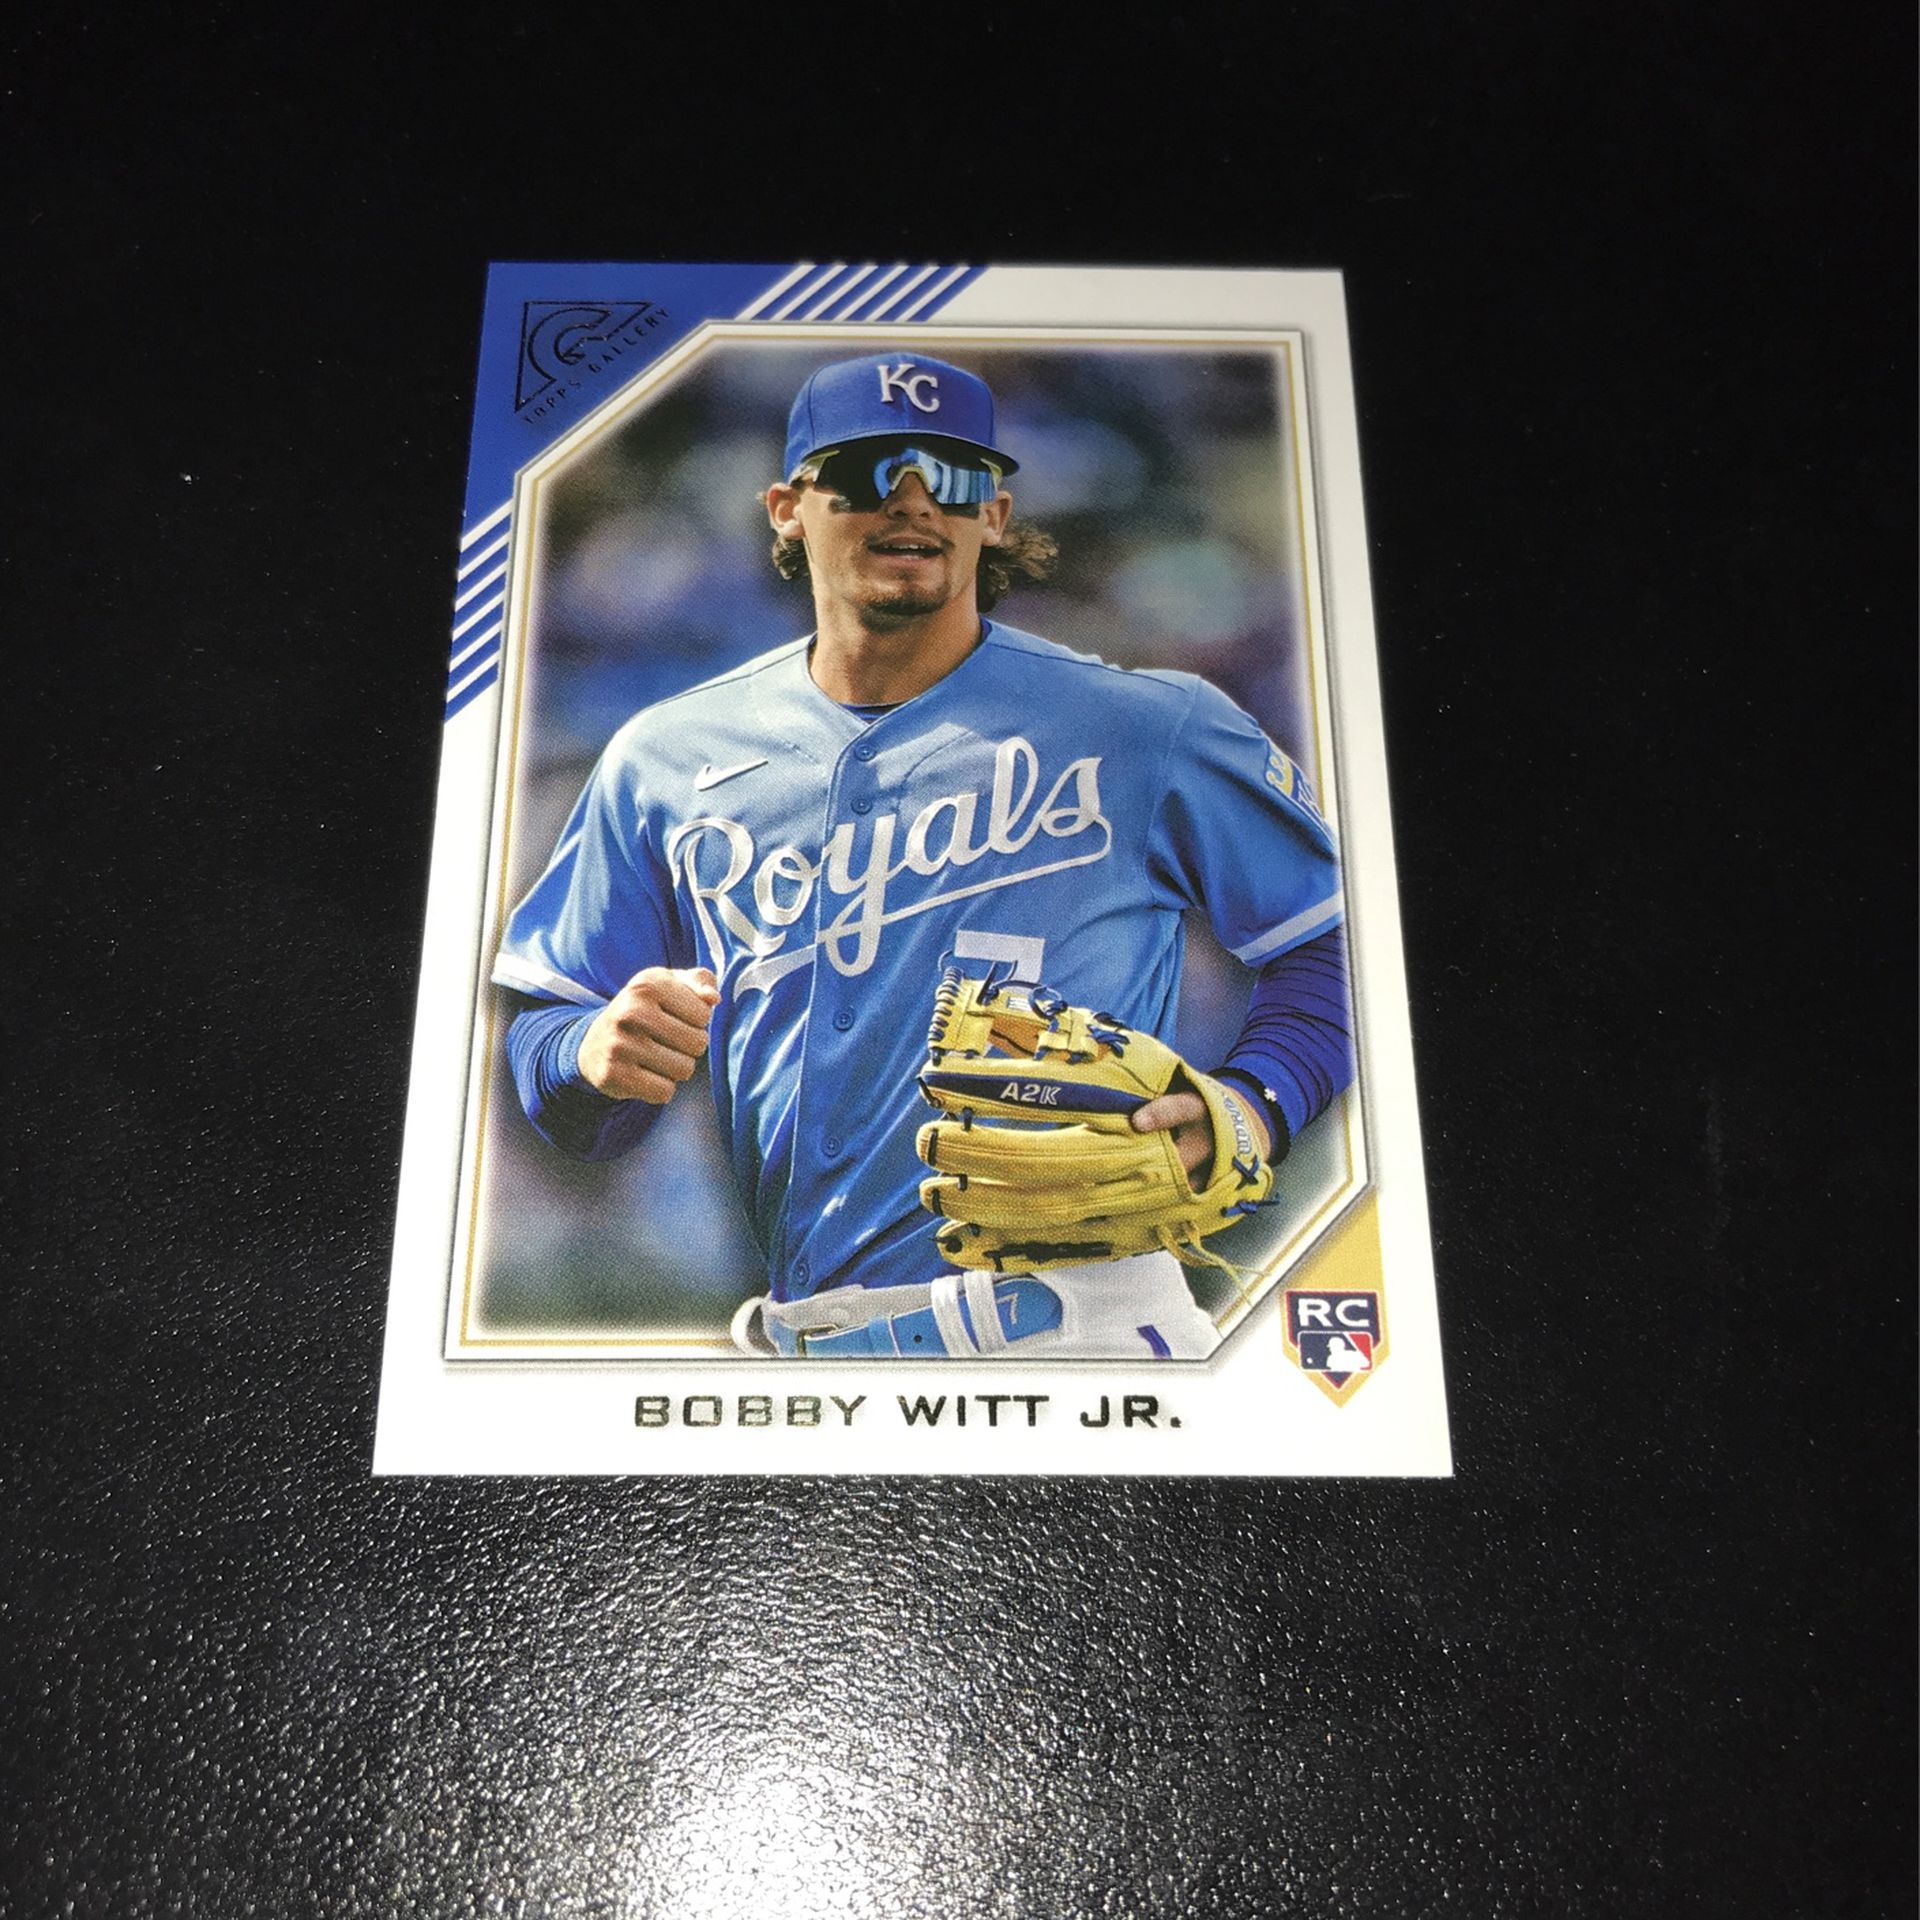 2022 Topps Gallery - Bobby Witt Jr Rookie Card for Sale in Iowa City